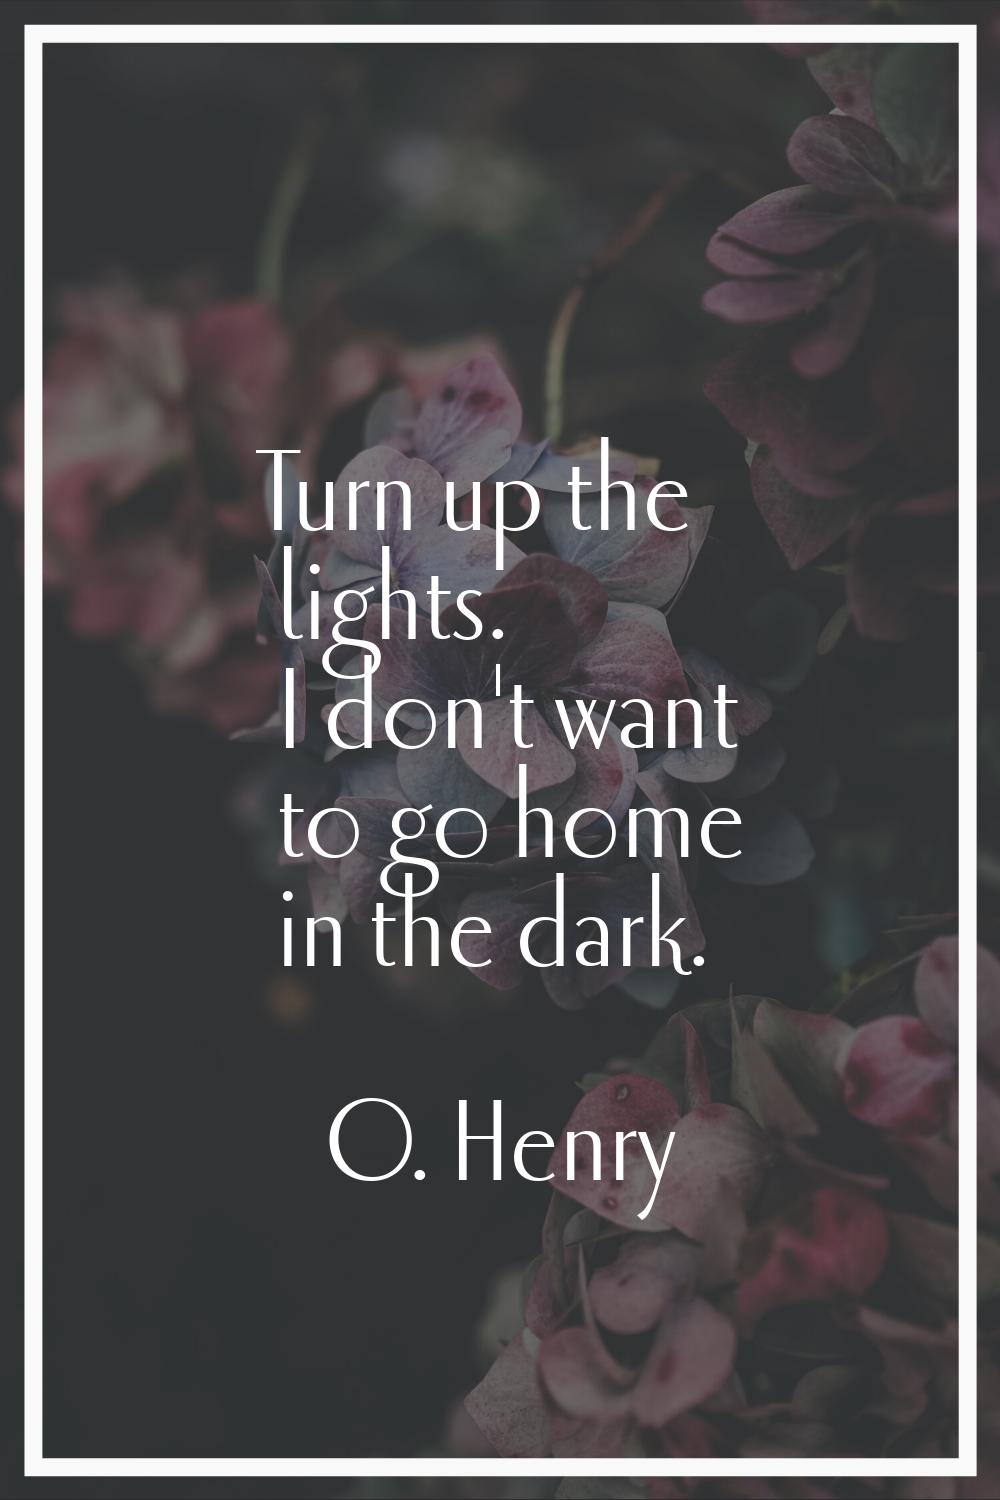 Turn up the lights. I don't want to go home in the dark.